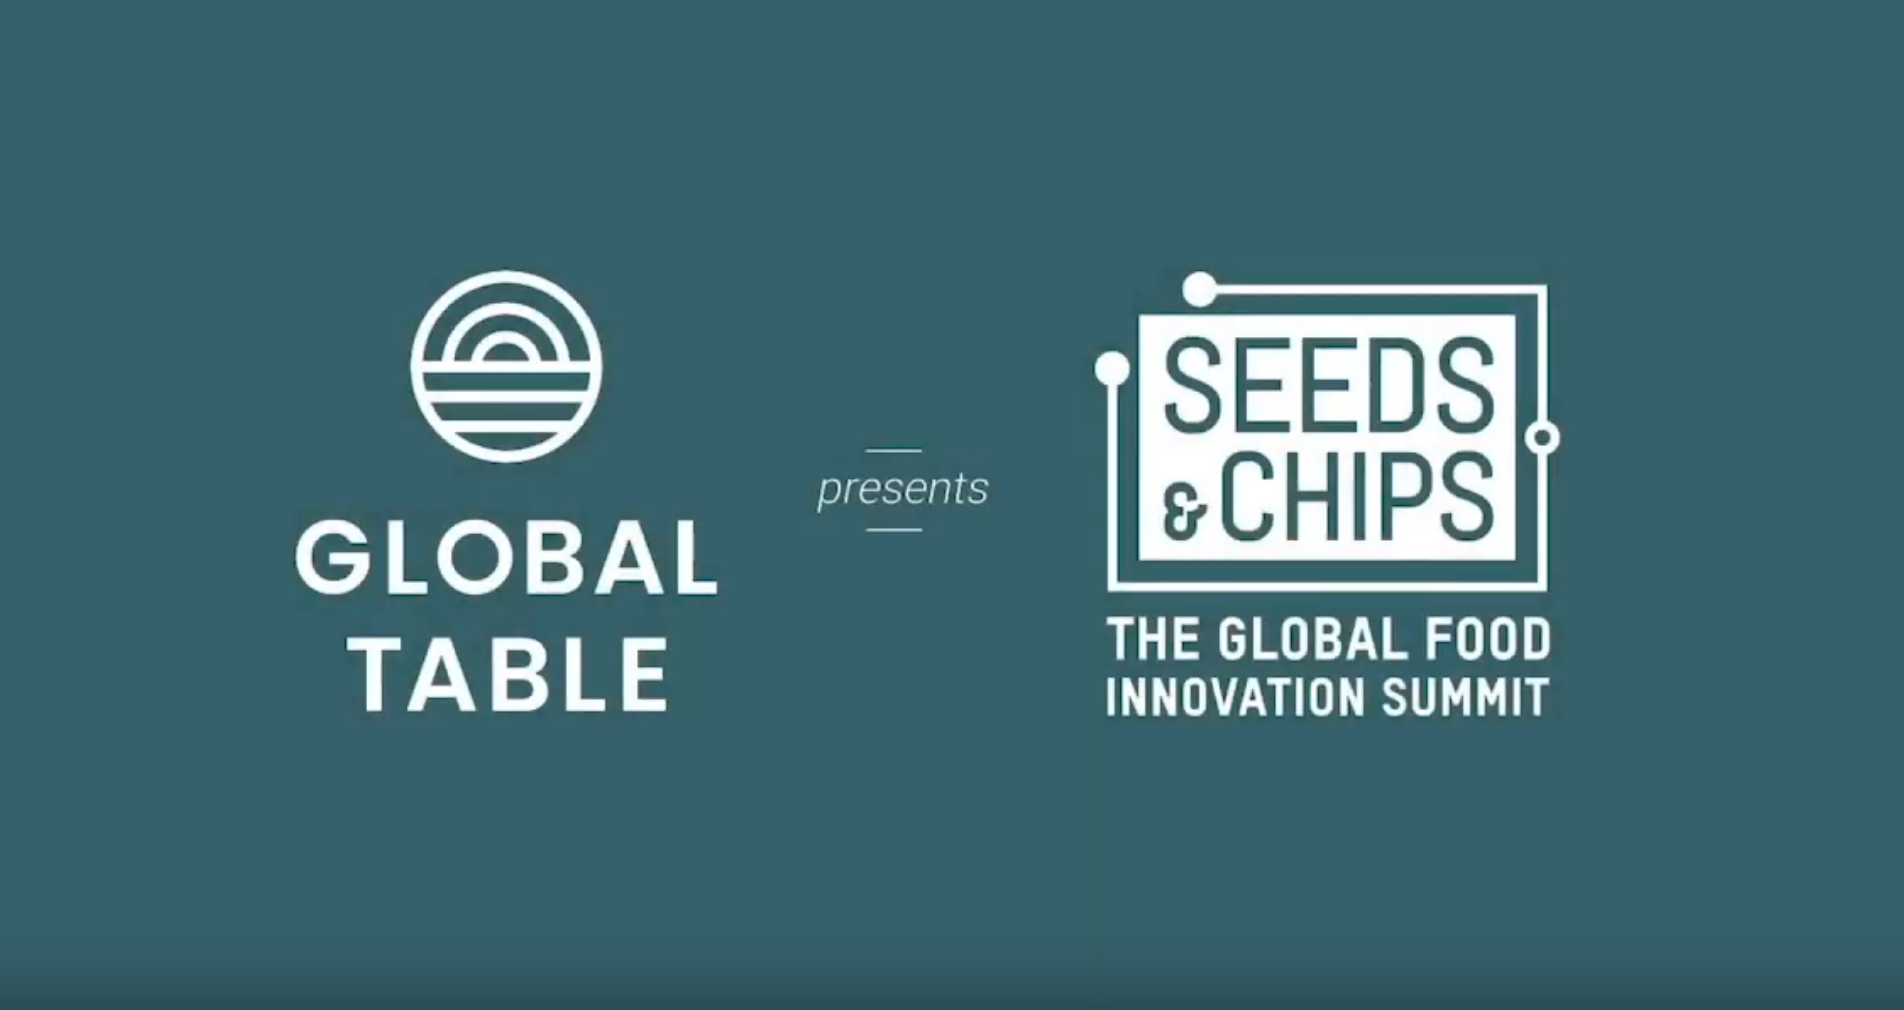 Seeds and Chips